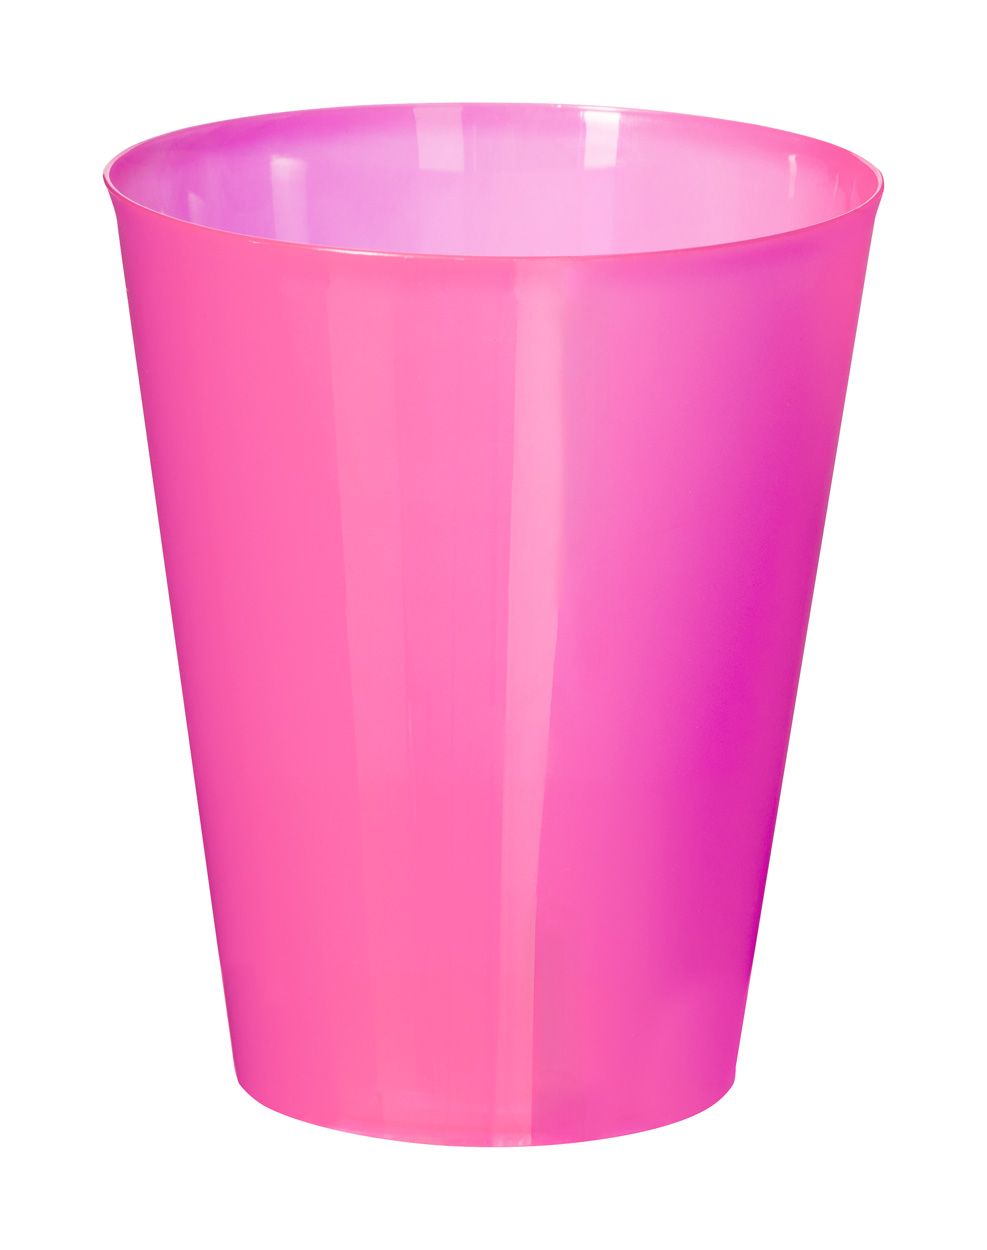 Colorbert reusable cup for events - Rosa